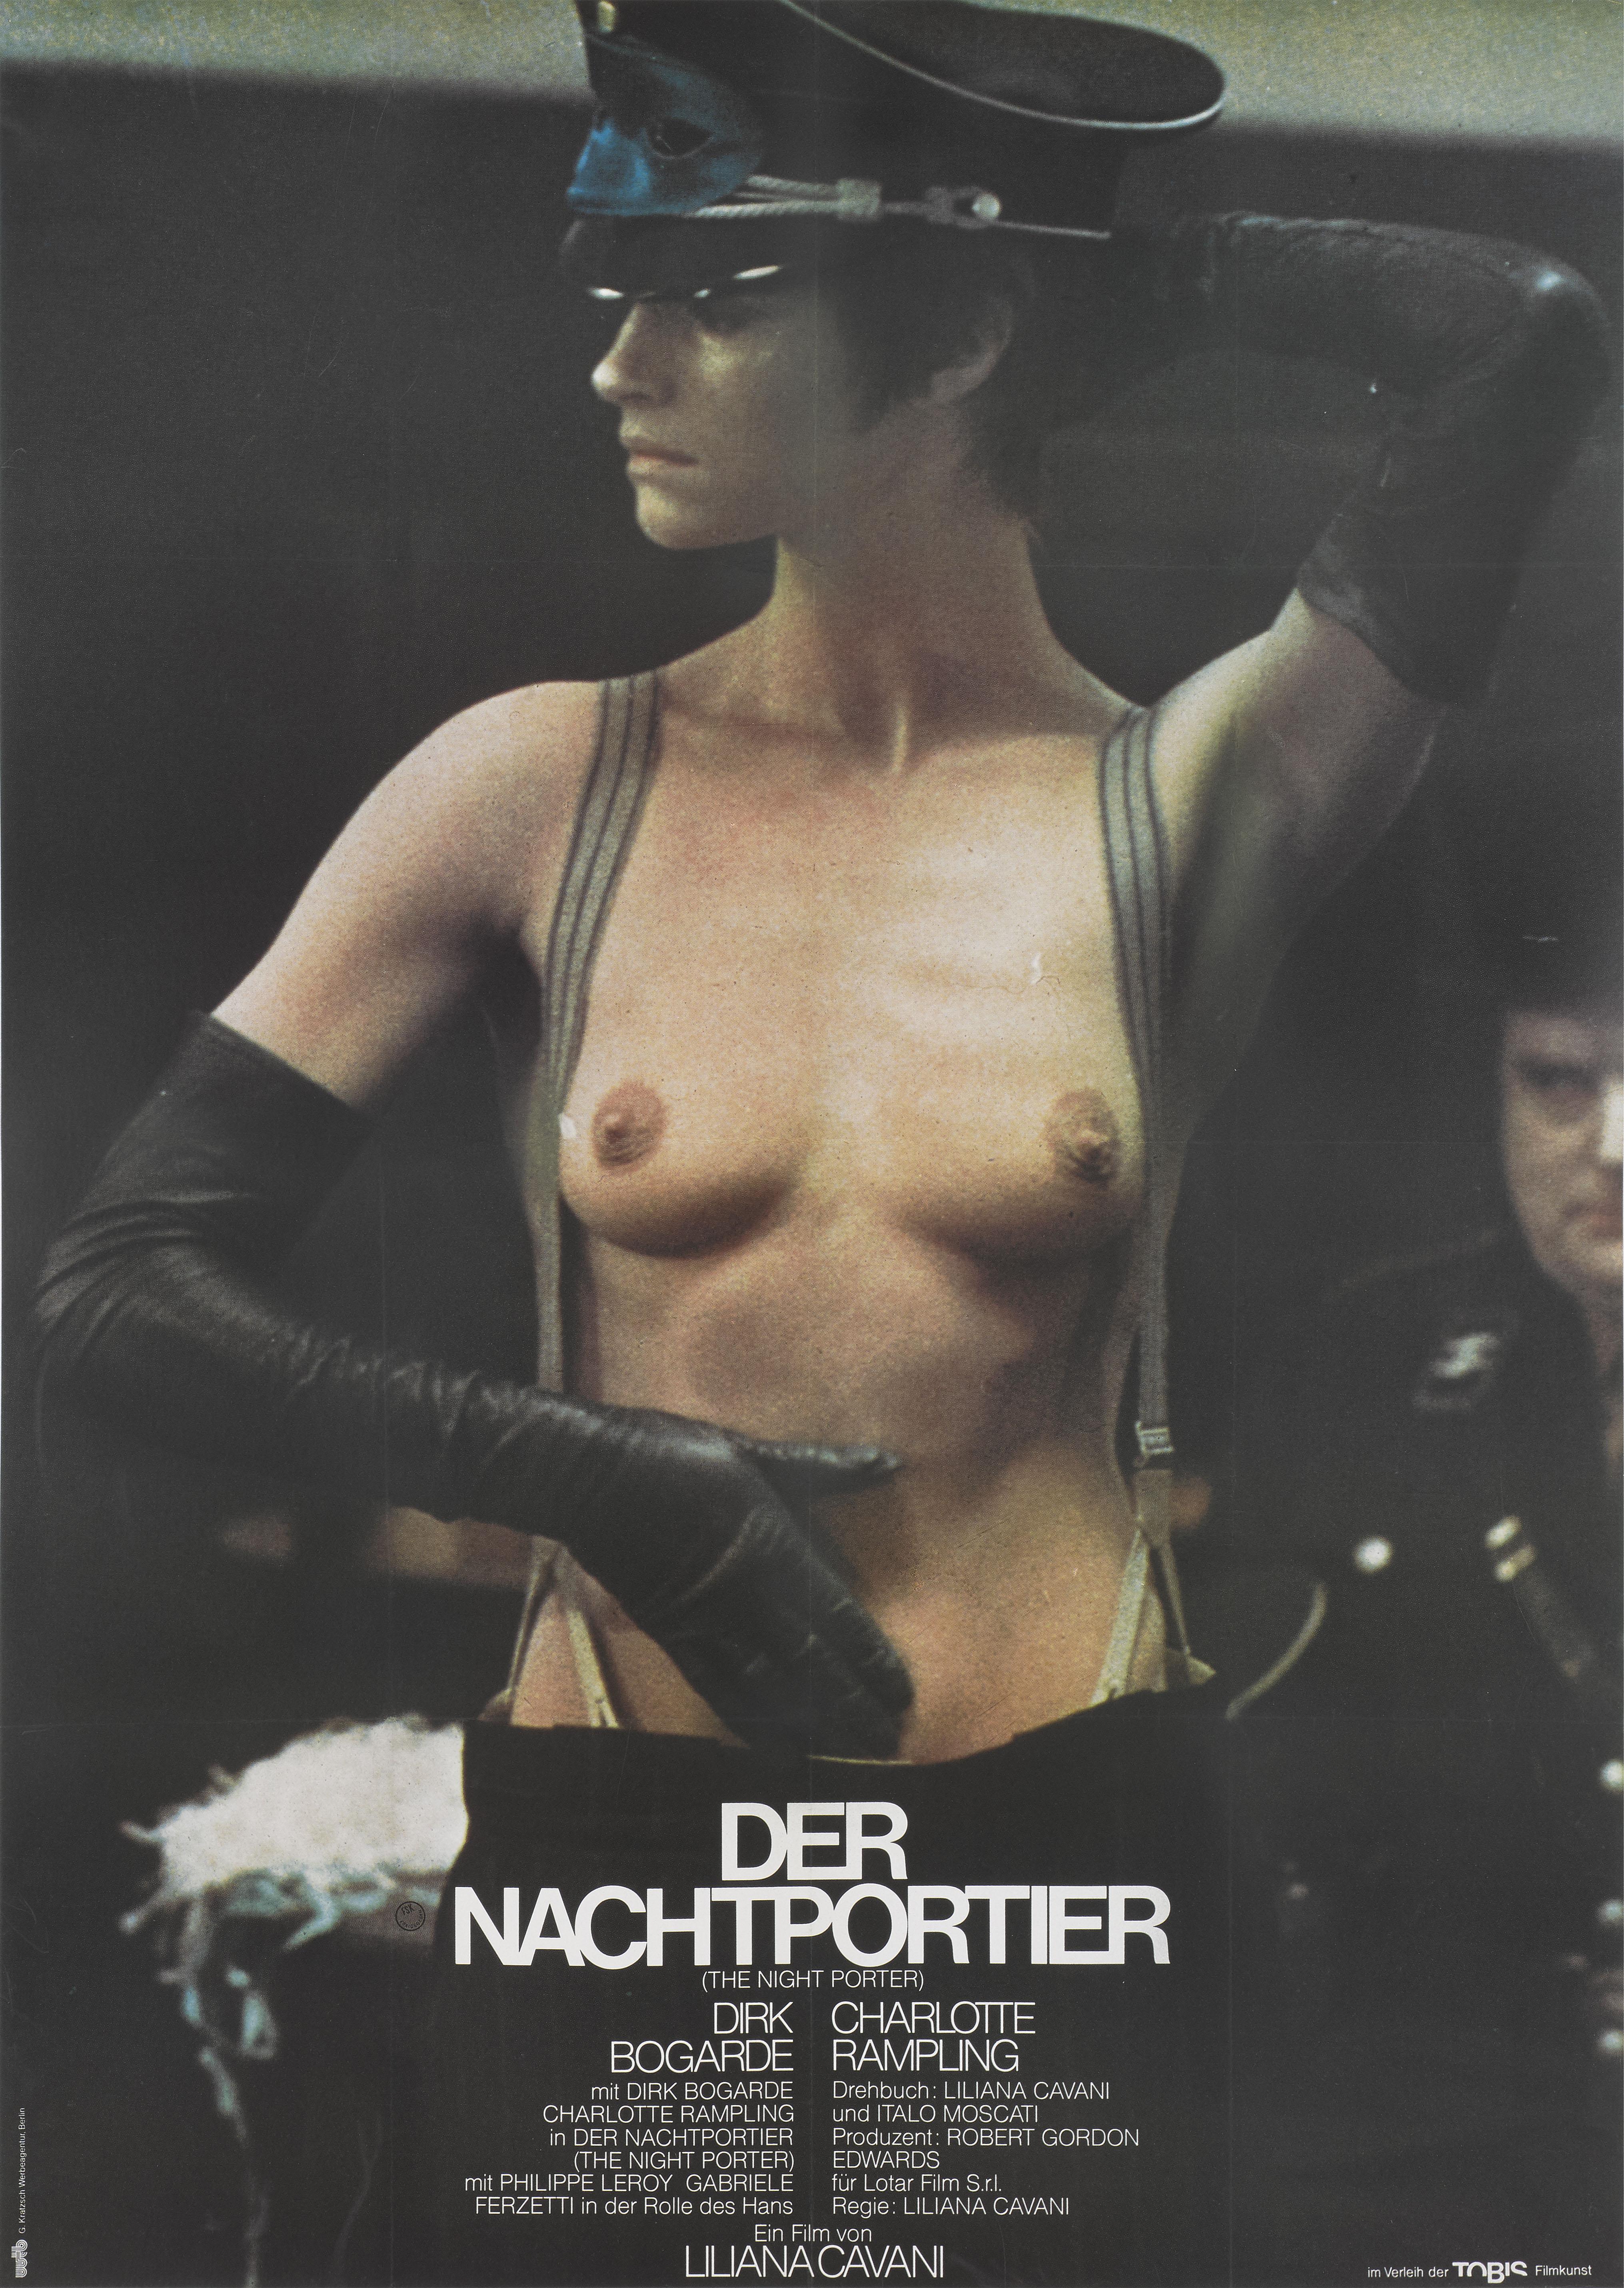 This is a rare large format German poster for the 1974 wart drama The Night Porter / Der Nachtportier.
This film was directed by Liliana Cavani and starred Dirk Bogarde and Charlotte Rampling. This film was released in Germany in 1975.
This poster